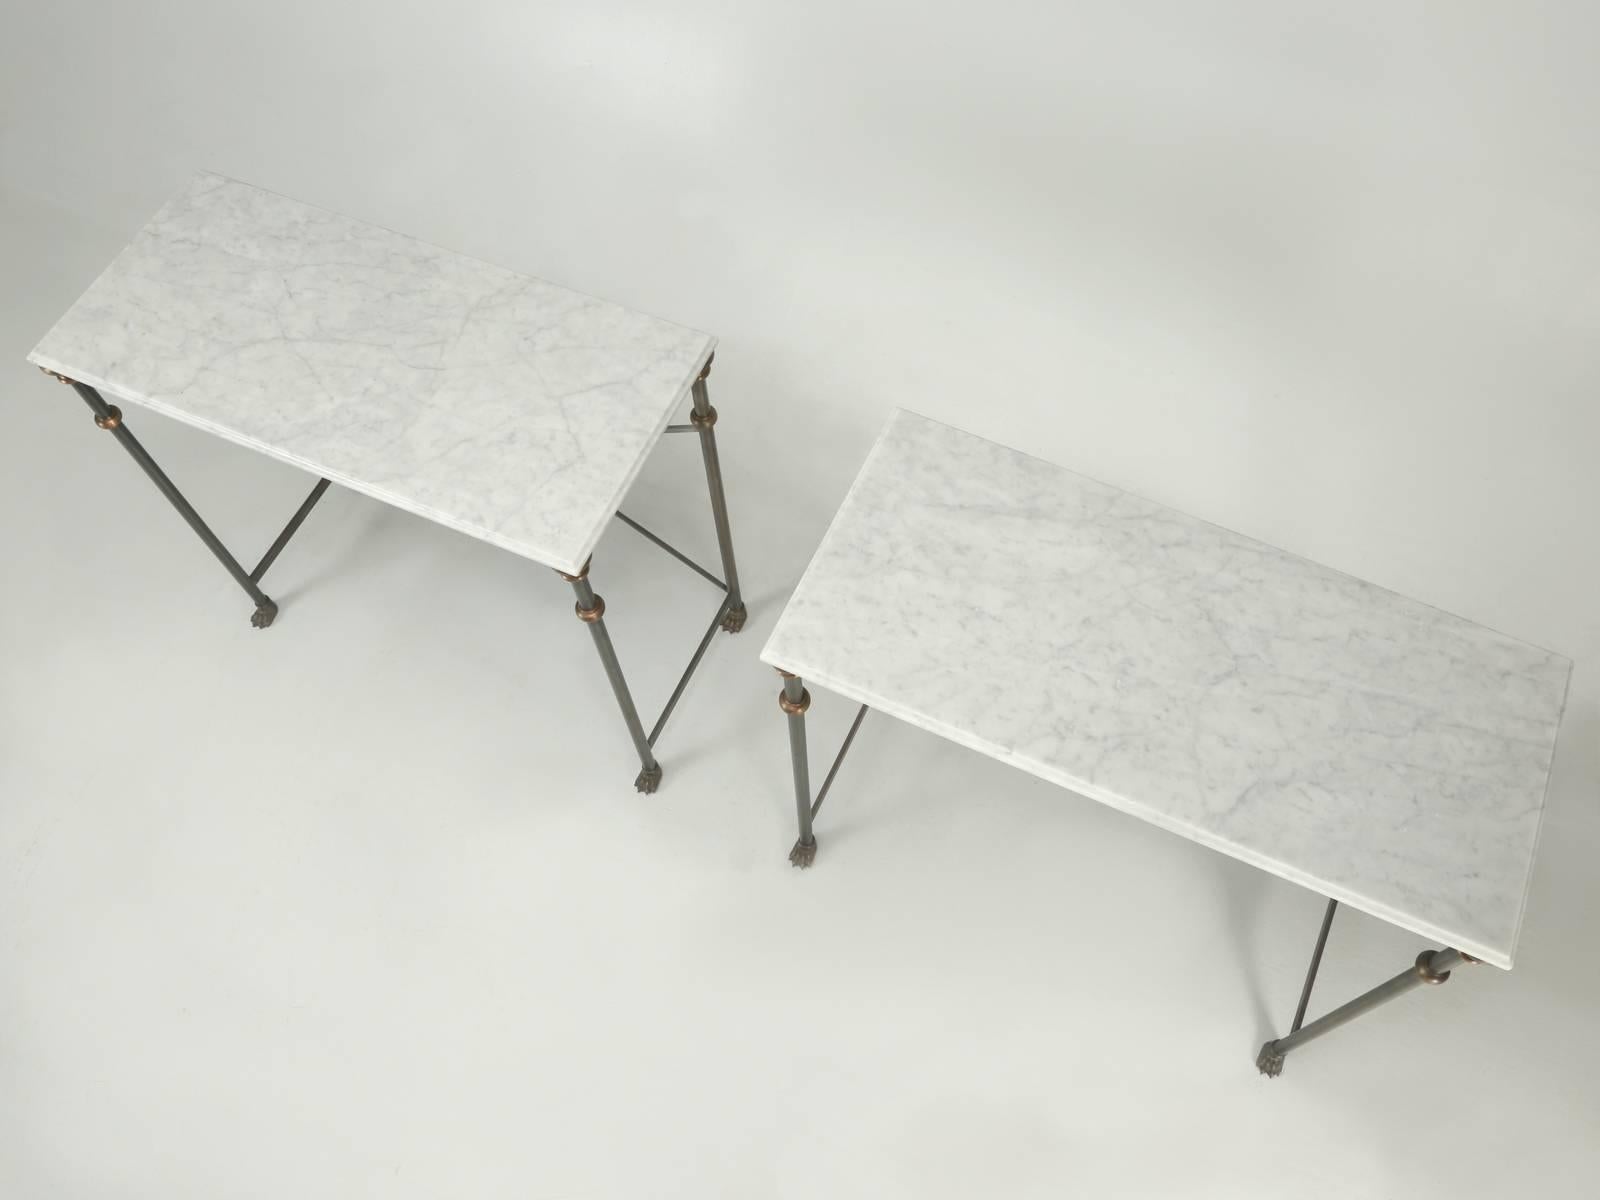 Matched pair of Old Plank Console Tables handmade in Chicago from Carrara Marble, Stainless Steel with solid Bronze and Brass fittings. These are part of our exclusive Old Plank Collection and can be made in any size and many other materials with